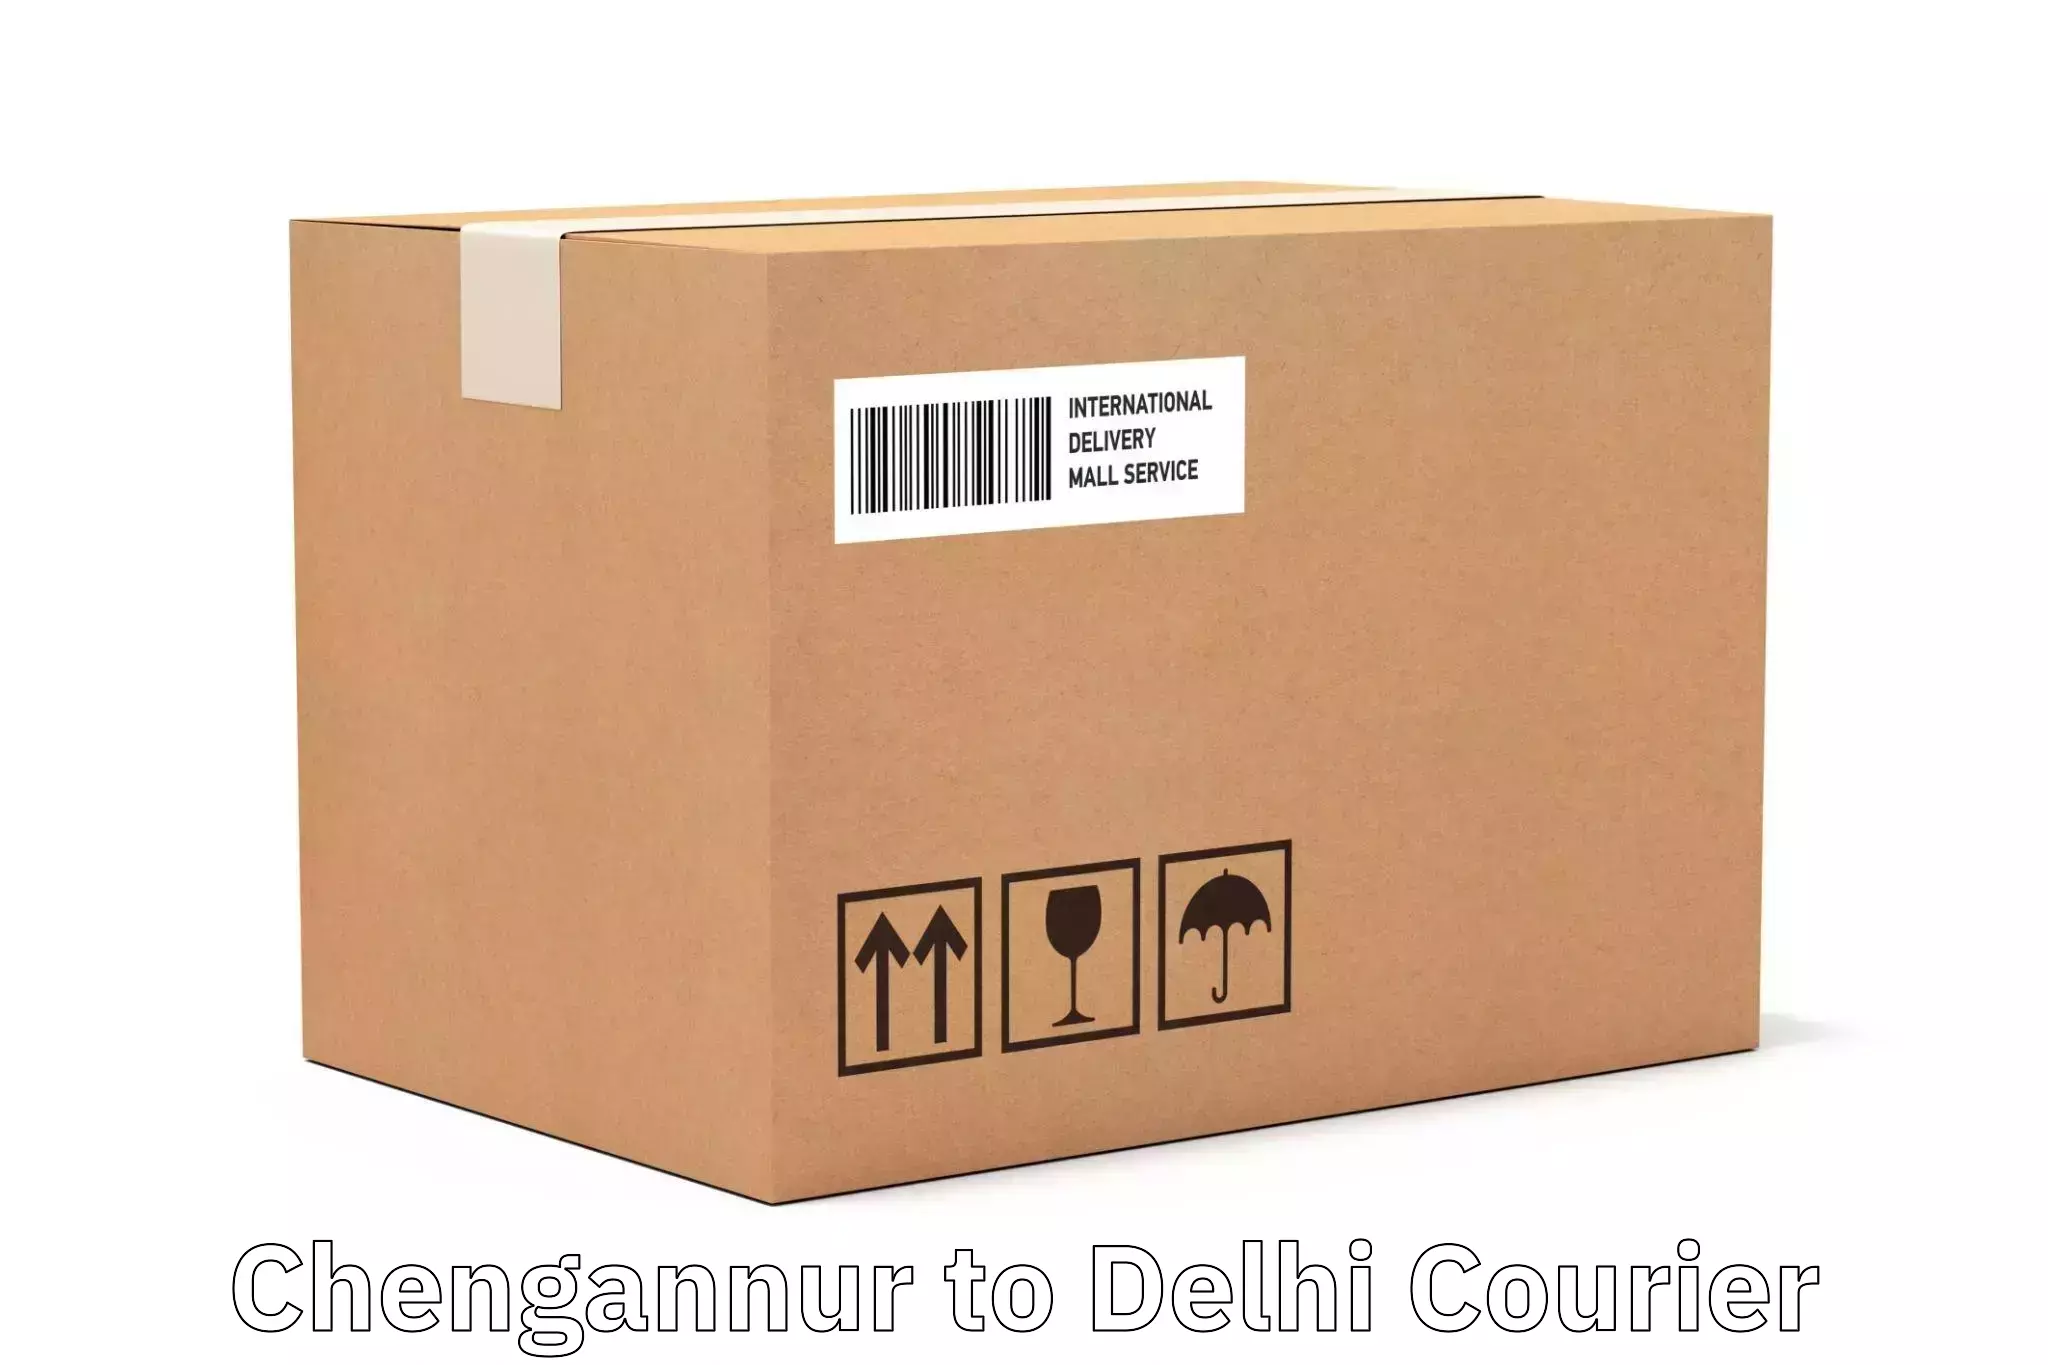 State-of-the-art courier technology Chengannur to IIT Delhi